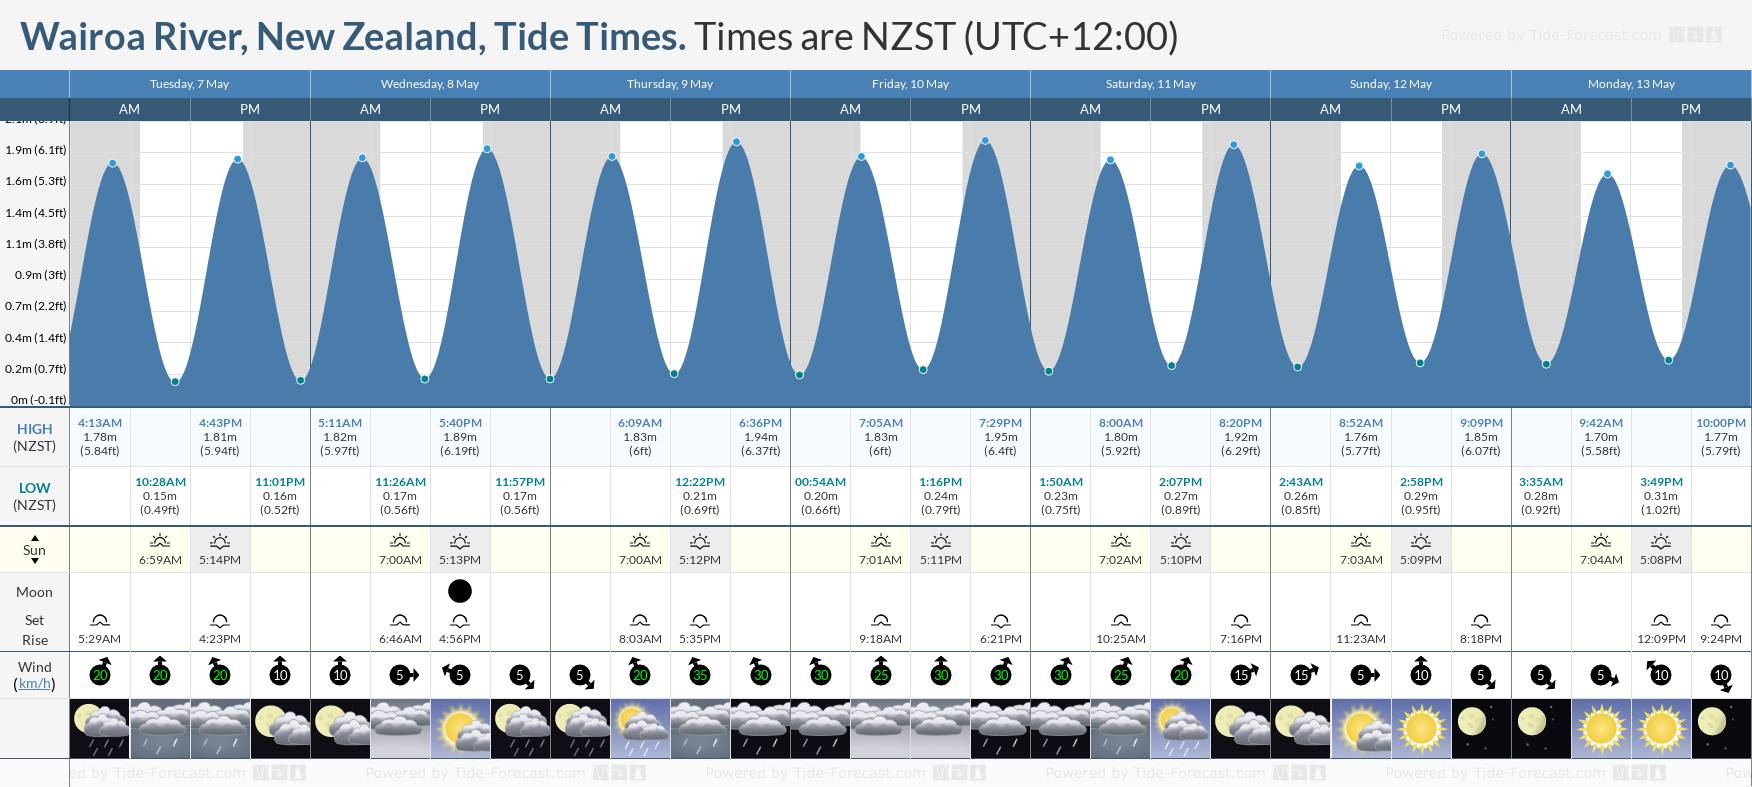 Wairoa River, New Zealand Tide Chart including high and low tide times for the next 7 days